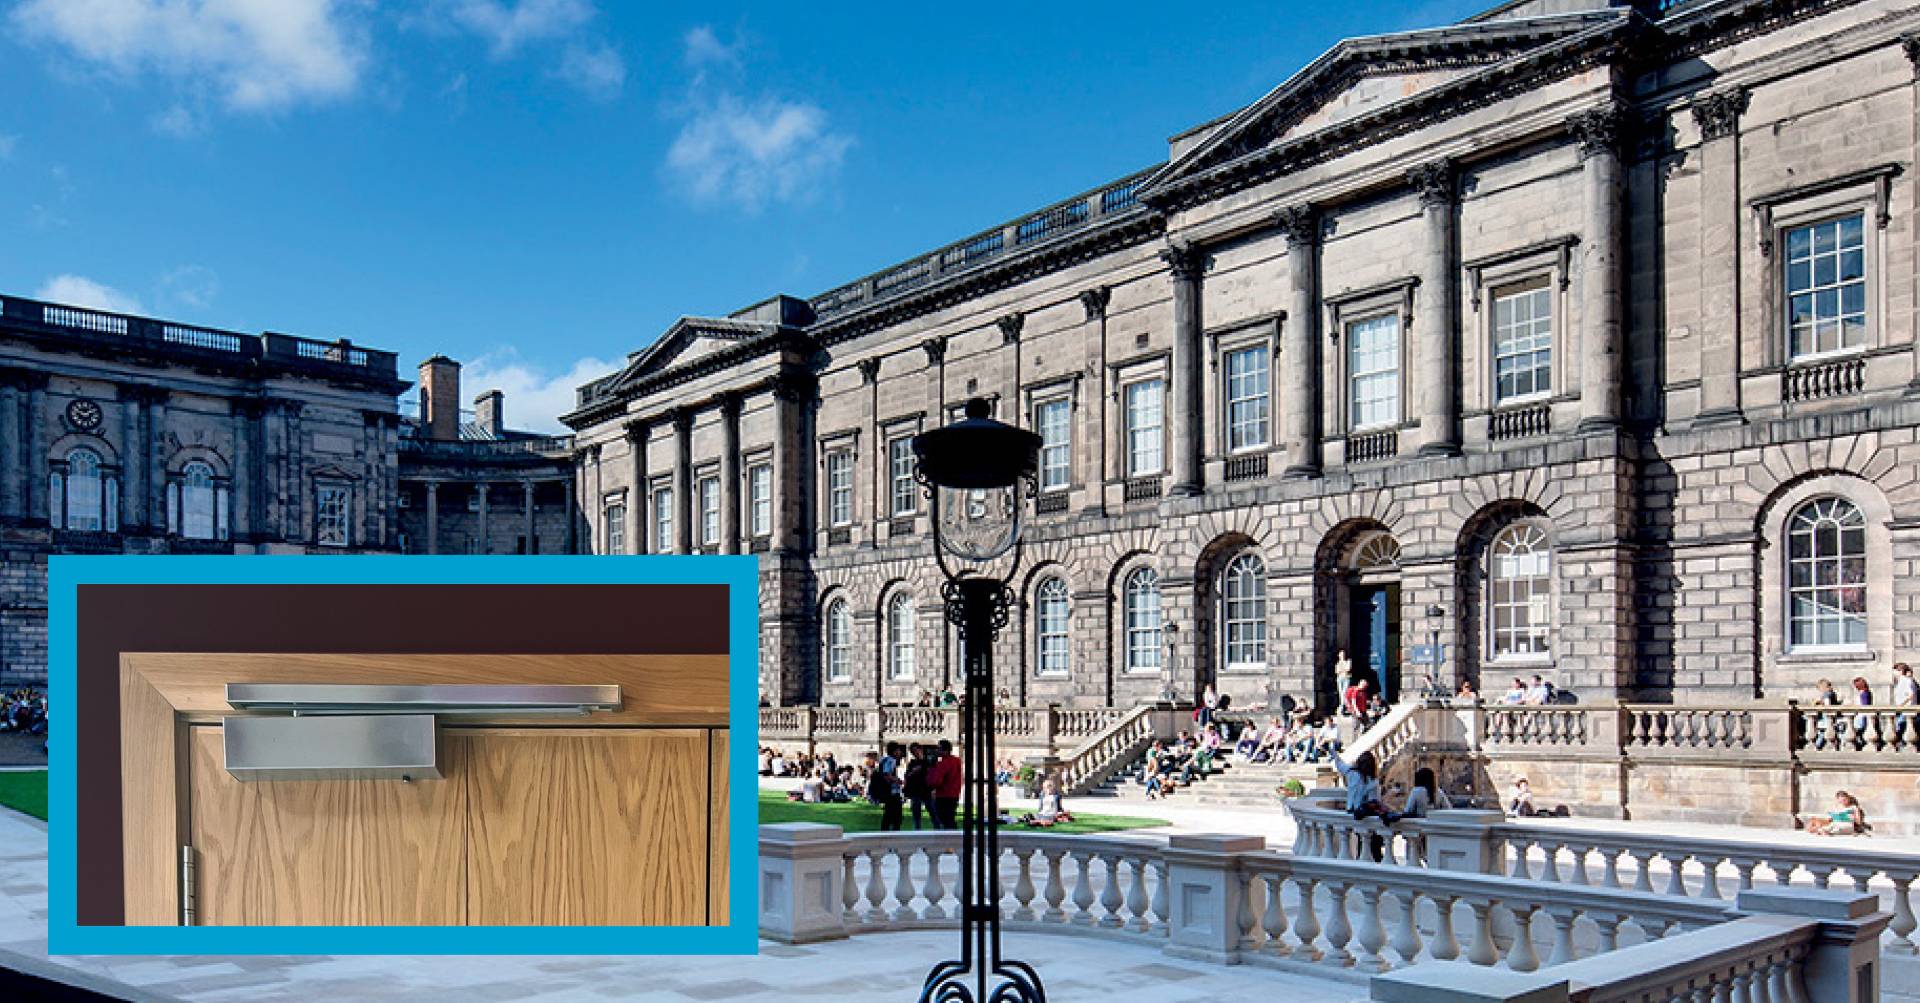 For the University of Edinburgh, ASSA ABLOY provides a one-stop-shop for high-performance Door Closers